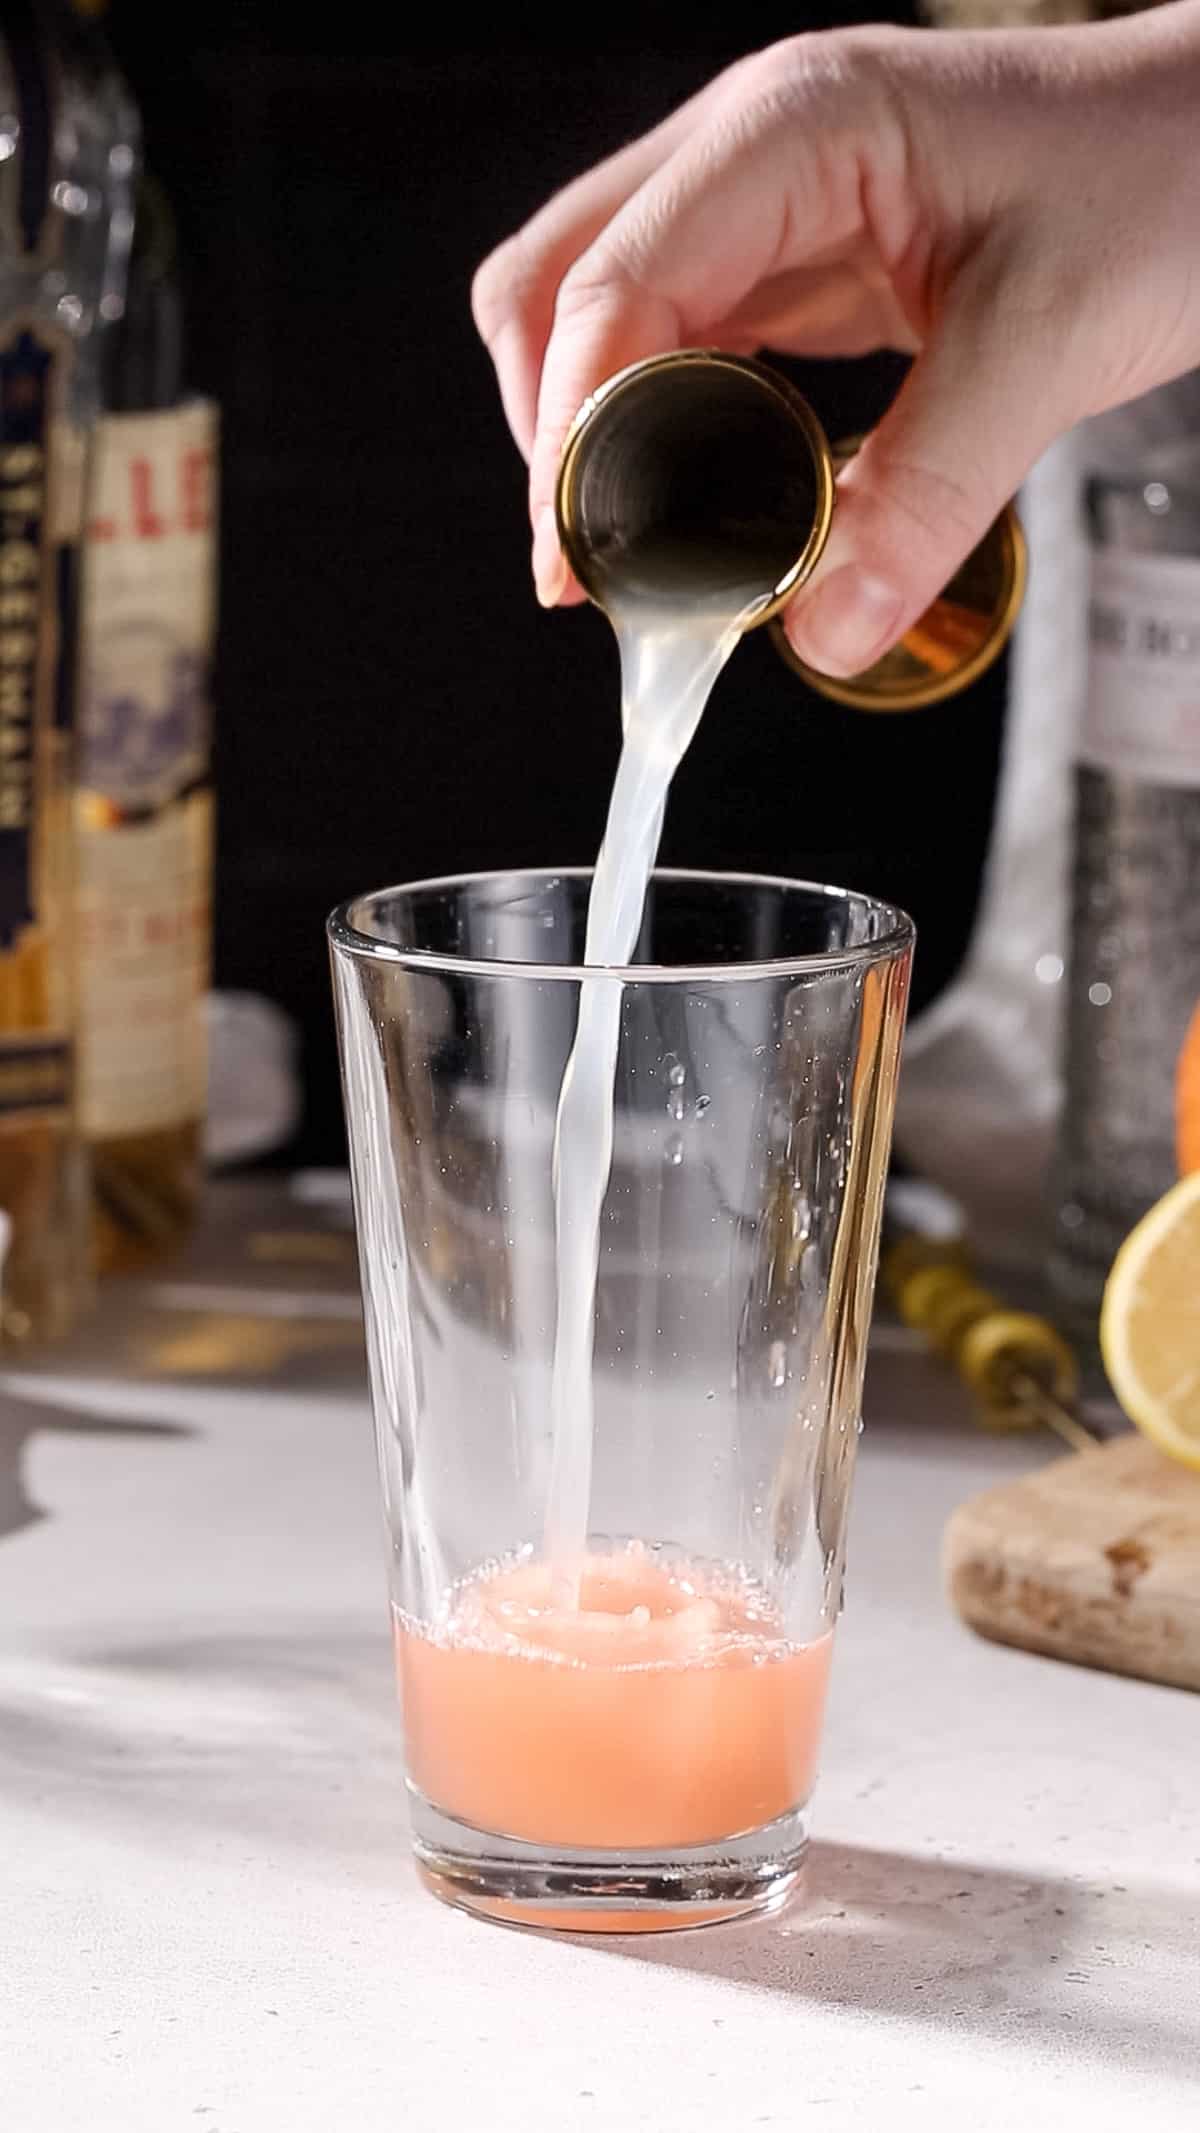 Hand pouring lemon juice into a cocktail shaker.